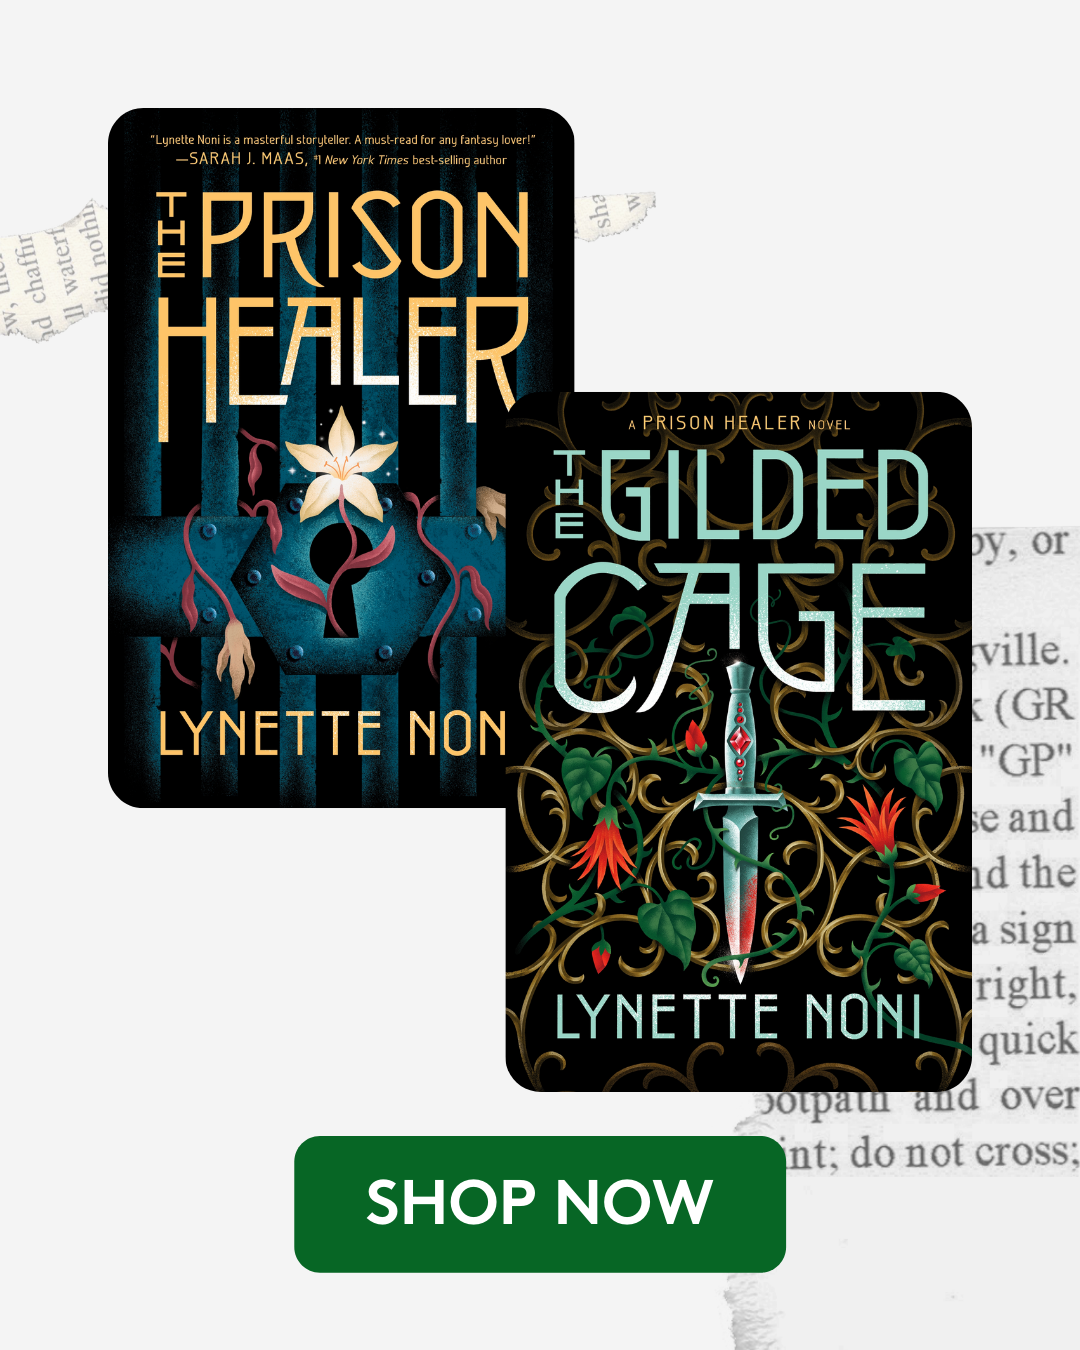 Shop The Prison Healer series by Australian Young Adult author, Lynette Noni. The Gilded Cage is Book 2.